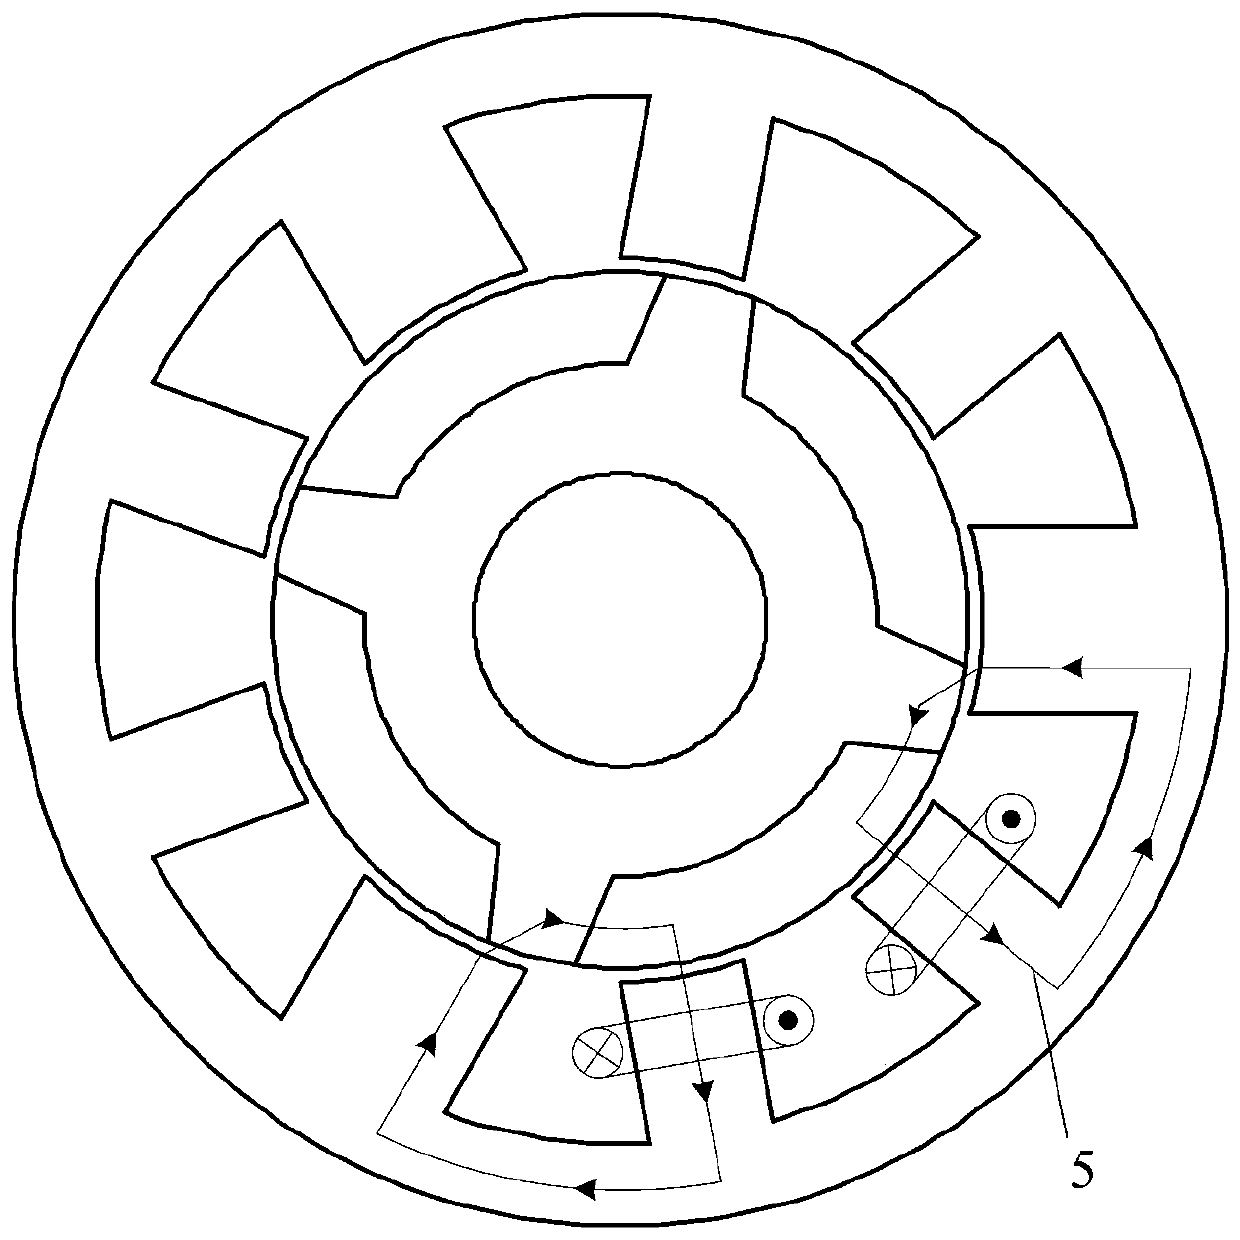 A Segmented Rotor Switched Reluctance Motor